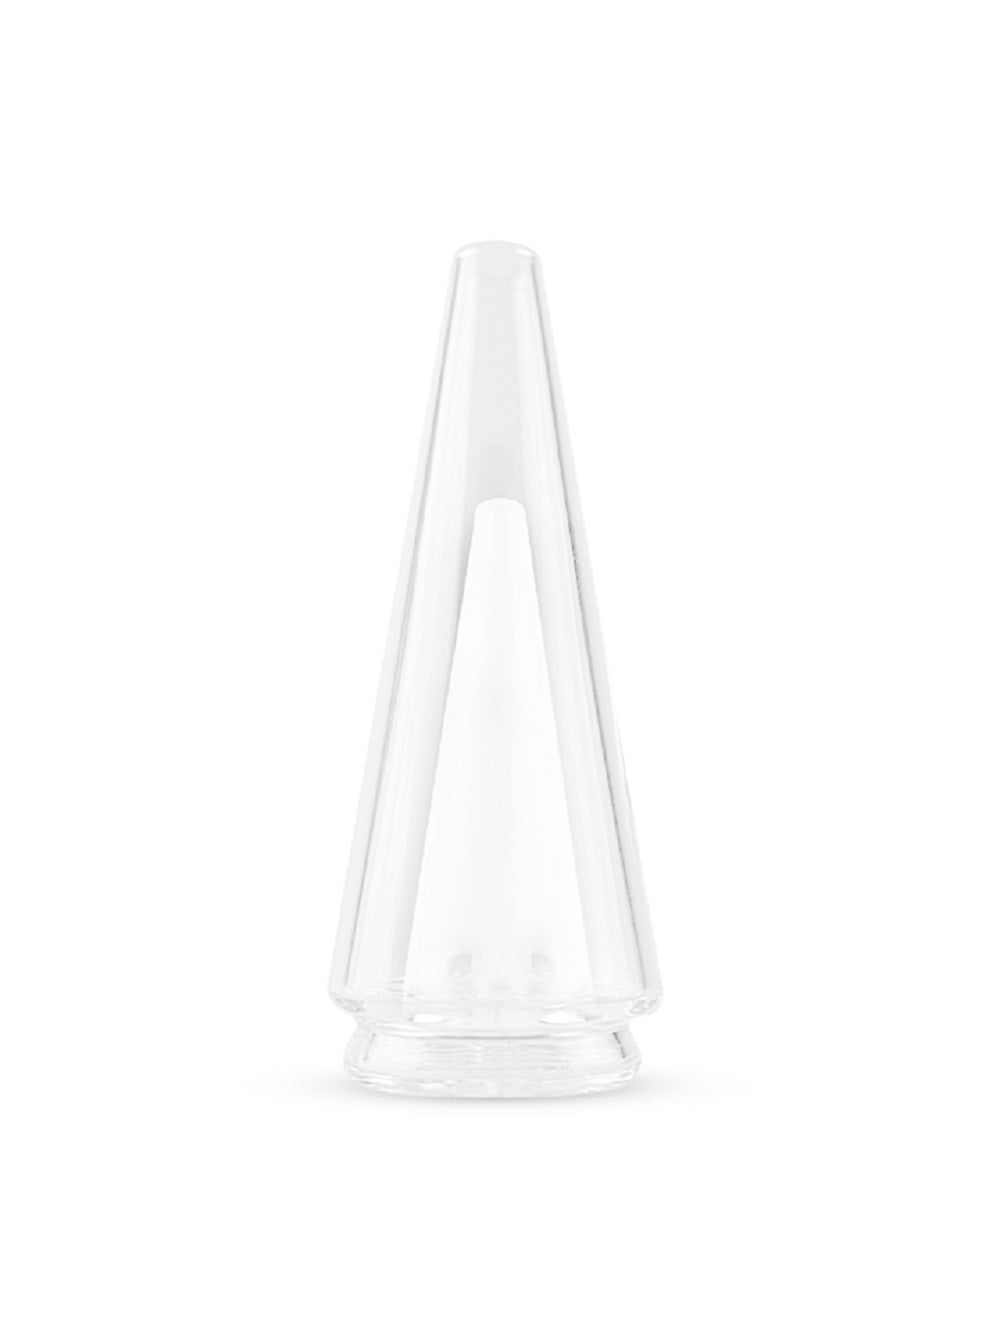 New Arrial PuffCo Peak Pro Replacement Glass